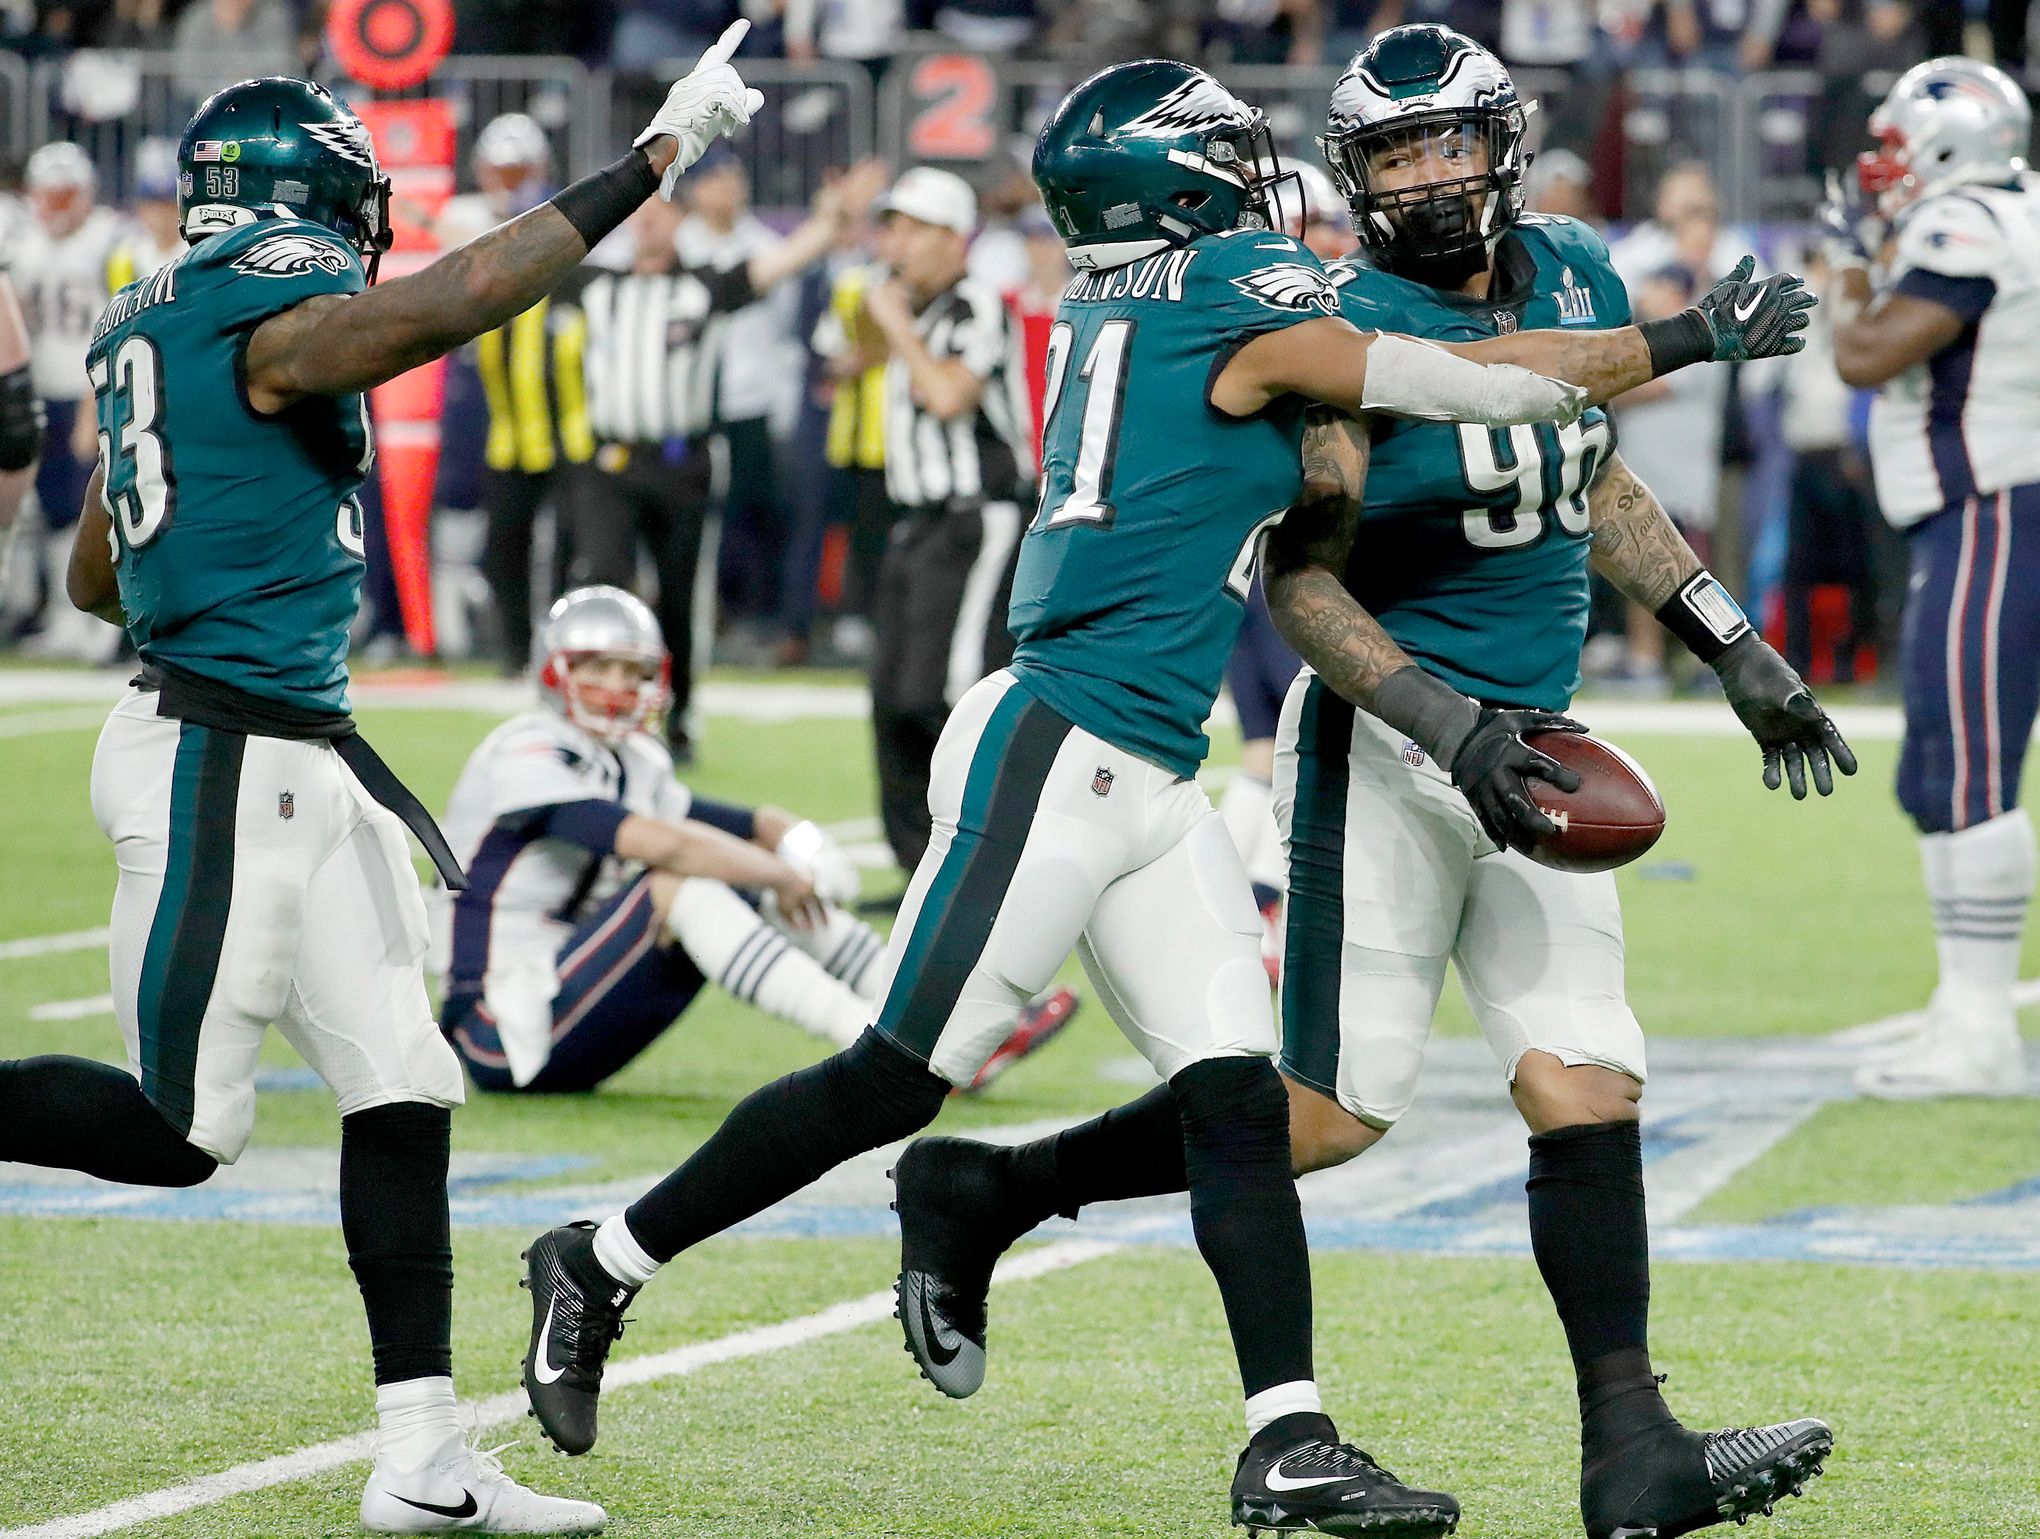 Nick Foles, not Tom Brady, hero as Eagles beat Patriots for first